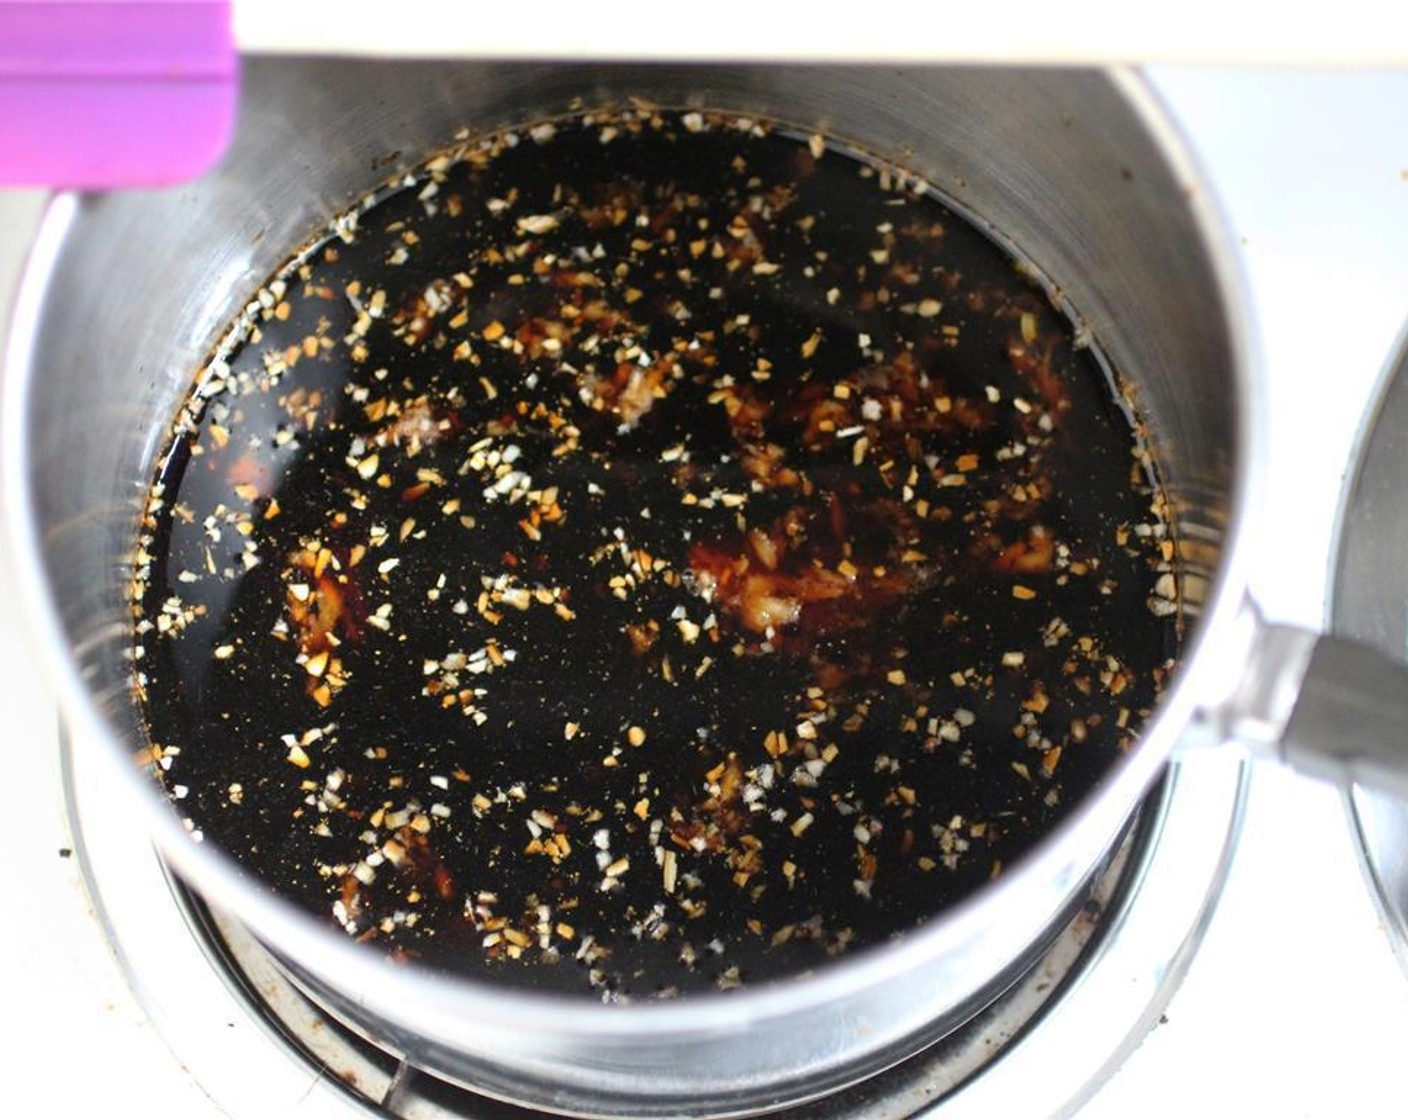 step 2 In a medium saucepan over medium heat, combine the Soy Sauce (1/2 cup), Ground Ginger (1 tsp), minced Garlic (1 clove), Minced Dried Onion (1 tsp), Water (1/4 cup) and Brown Sugar (2 Tbsp). Stir until sugar is melted and incorporated.